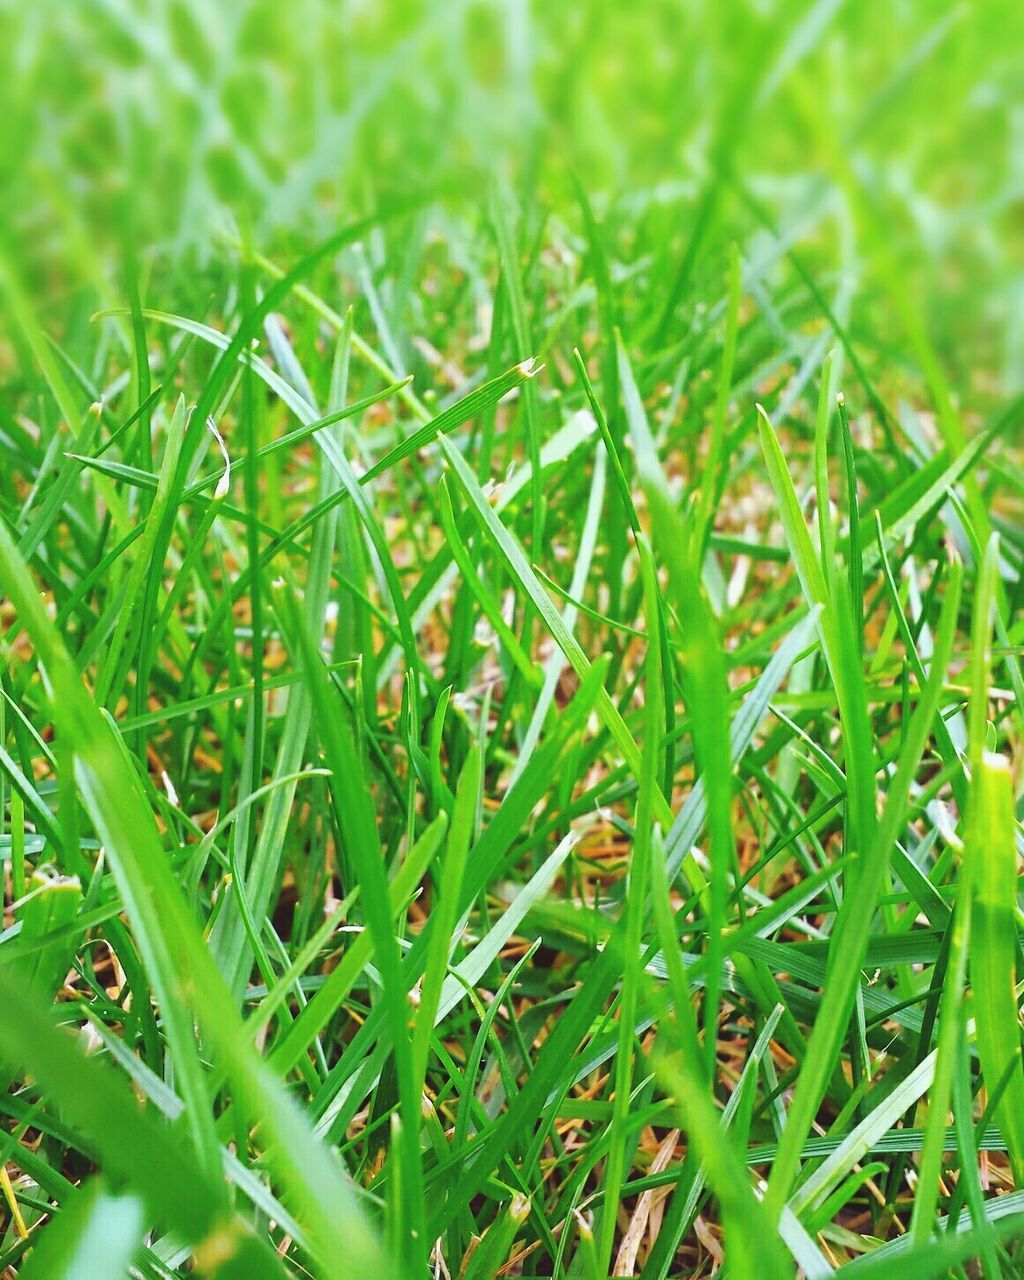 grass, green color, growth, field, grassy, blade of grass, nature, beauty in nature, green, plant, close-up, tranquility, selective focus, freshness, day, outdoors, backgrounds, no people, lush foliage, full frame